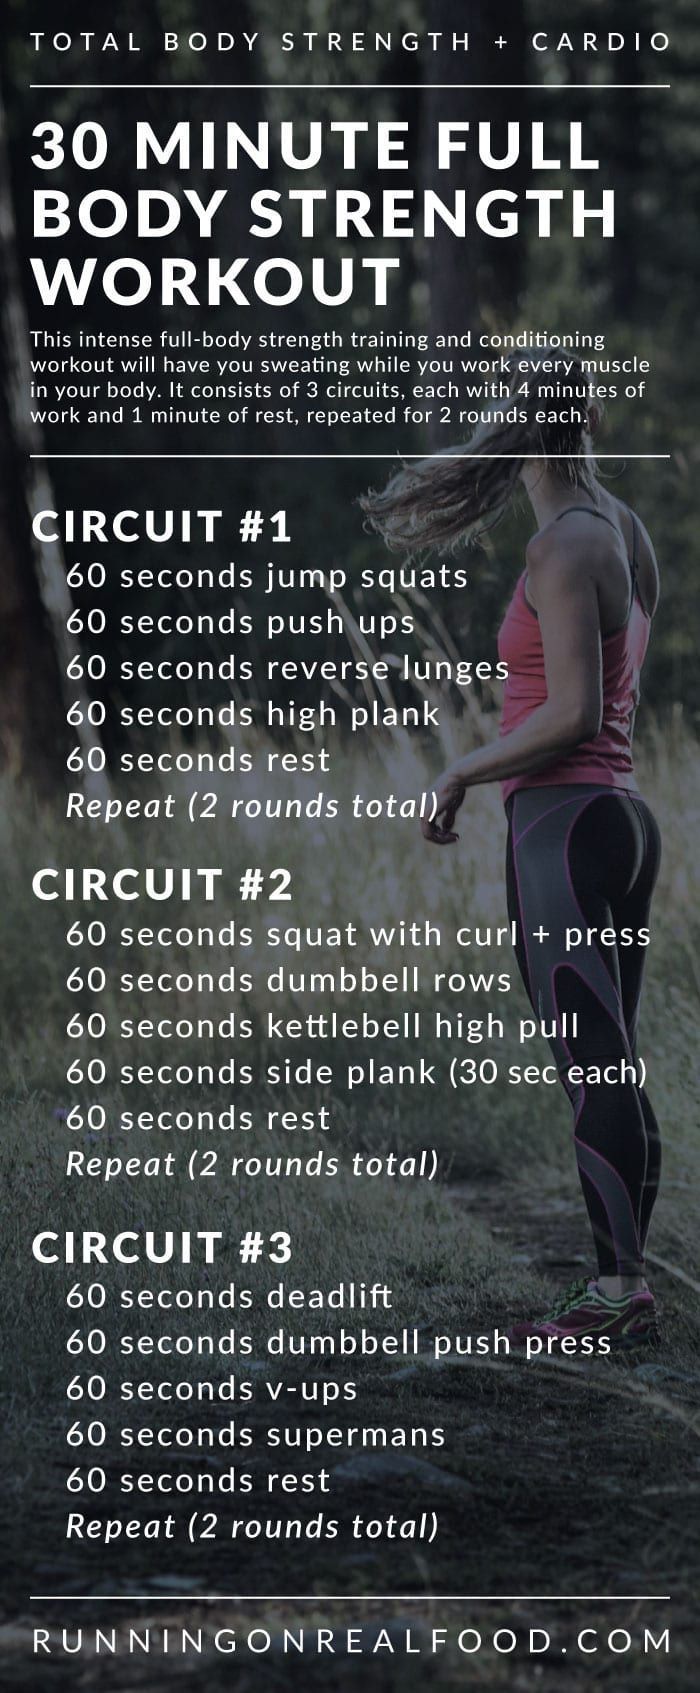 14 fitness Training pictures ideas